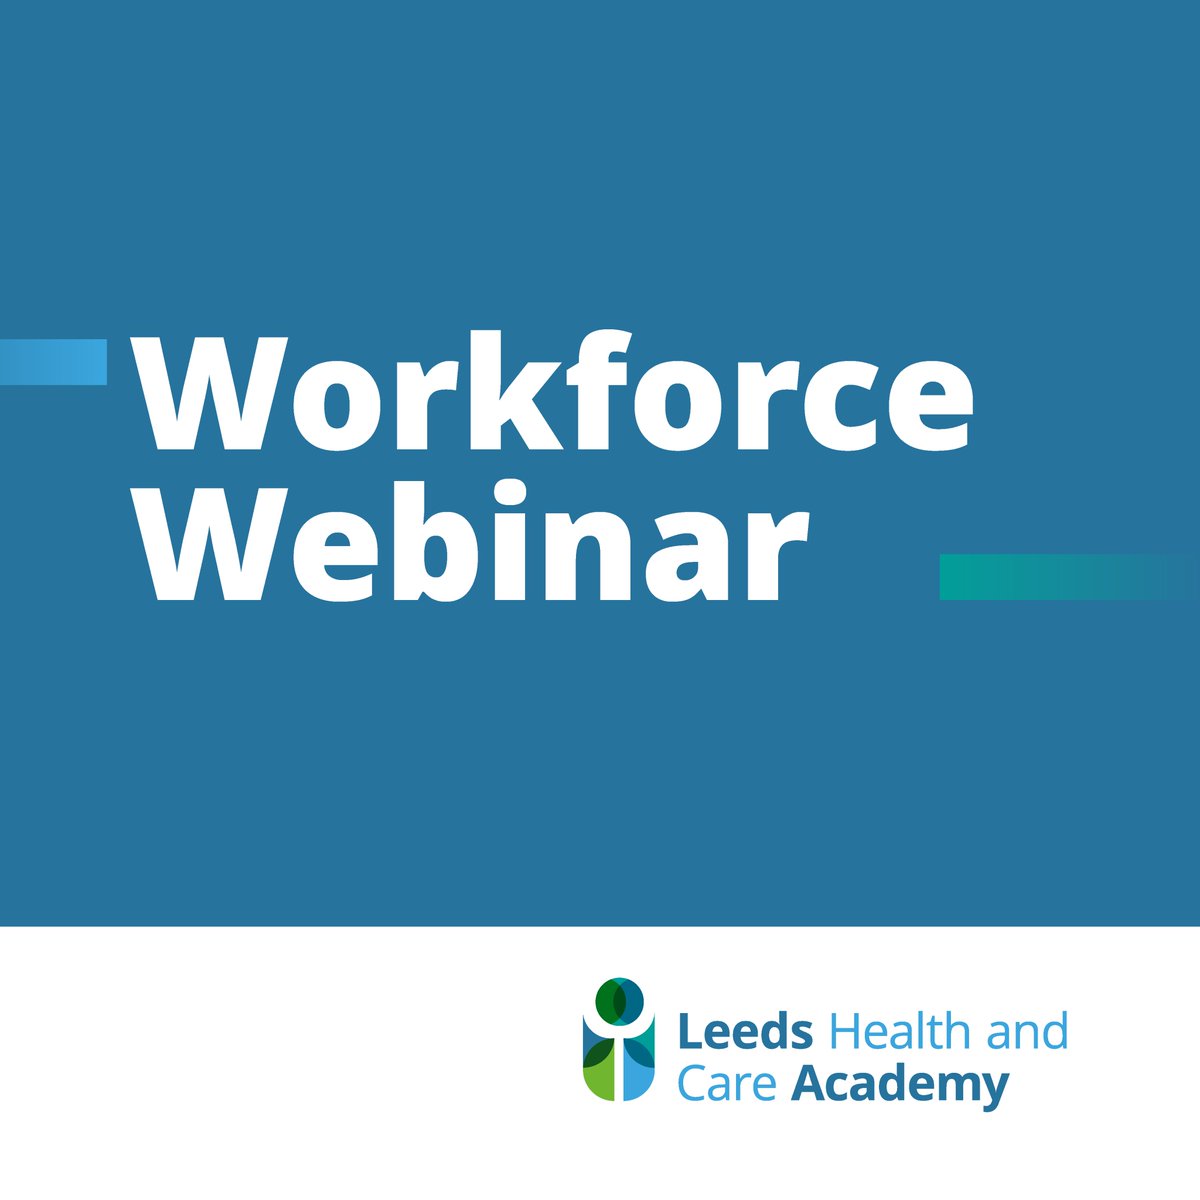 Do you work in the third sector or independent care sector and want to learn about the exciting tools available in Leeds that can benefit your organisation & employees? Join one of our upcoming workforce webinars taking place in May & June. Register here: leedshealthandcareacademy.org/wp-content/upl…